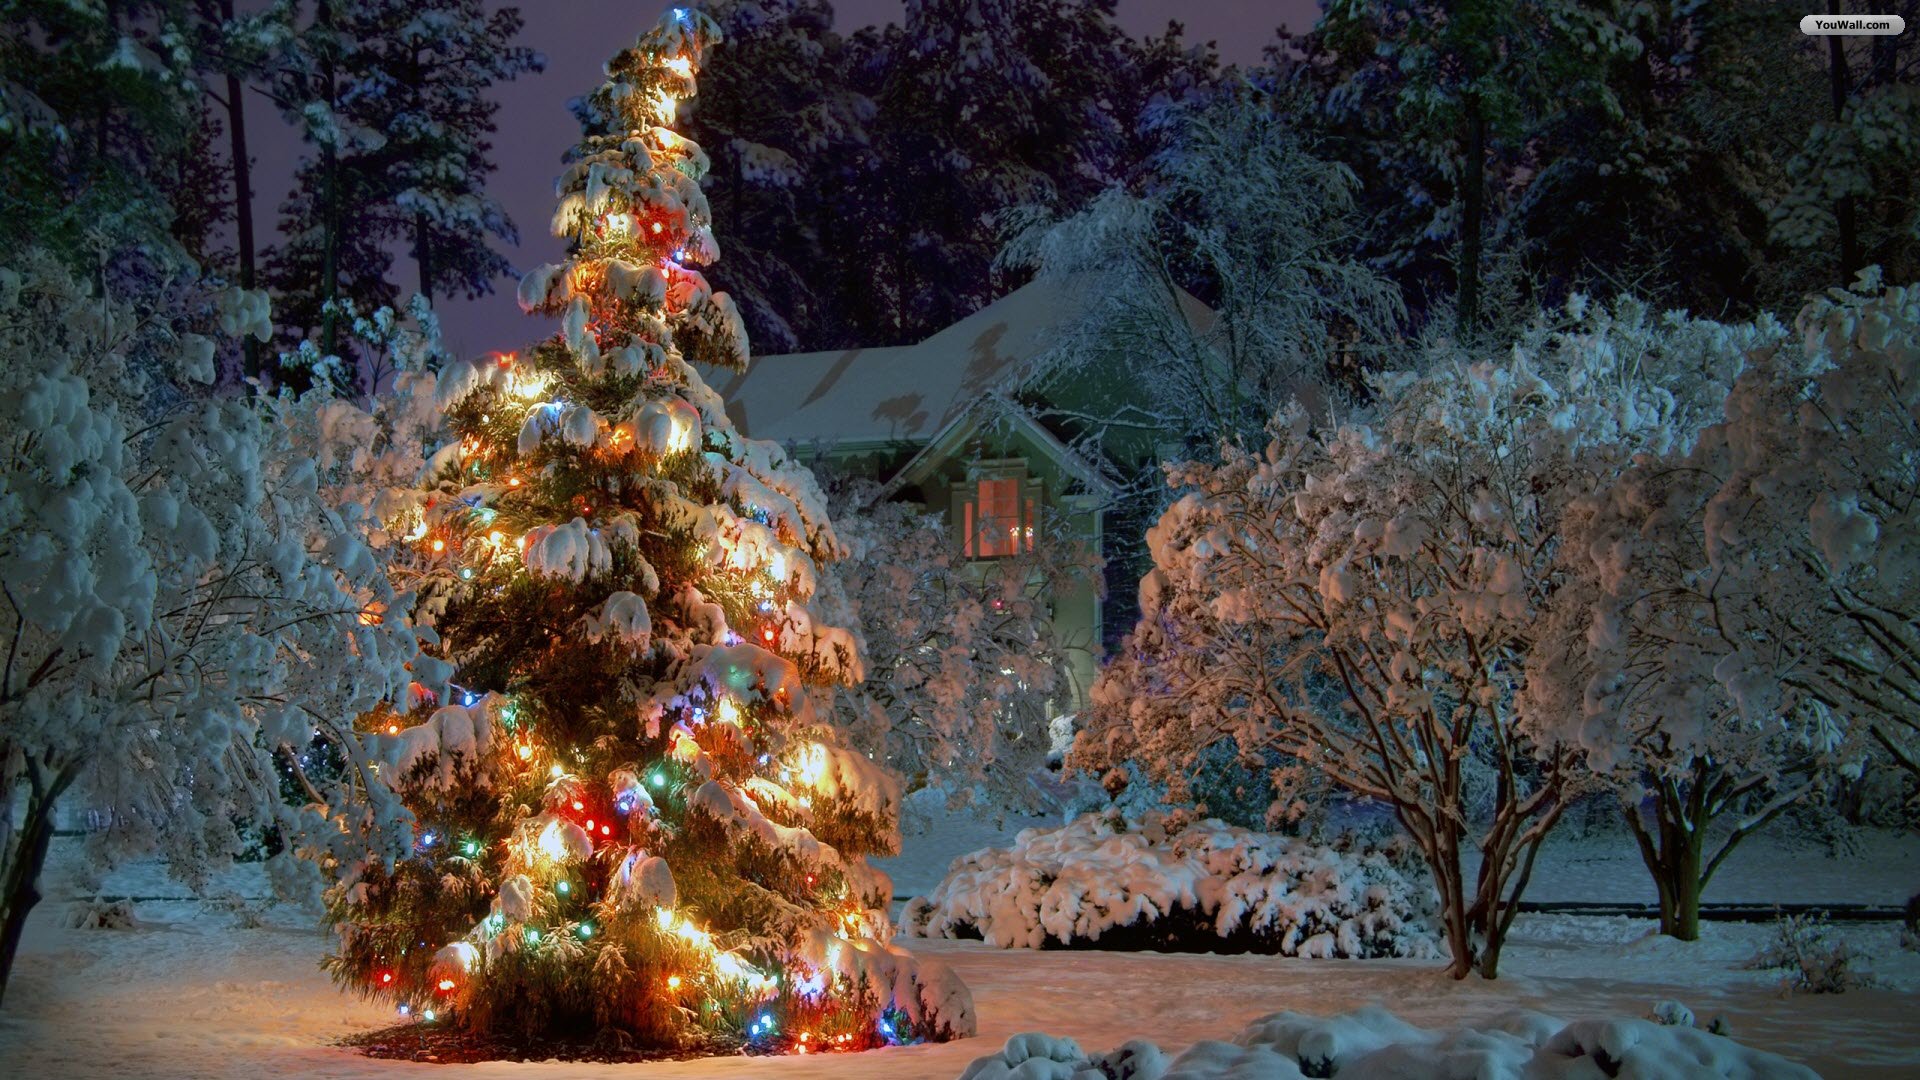 Free download Free Winter Christmas Wallpaper Images at Landscape ...